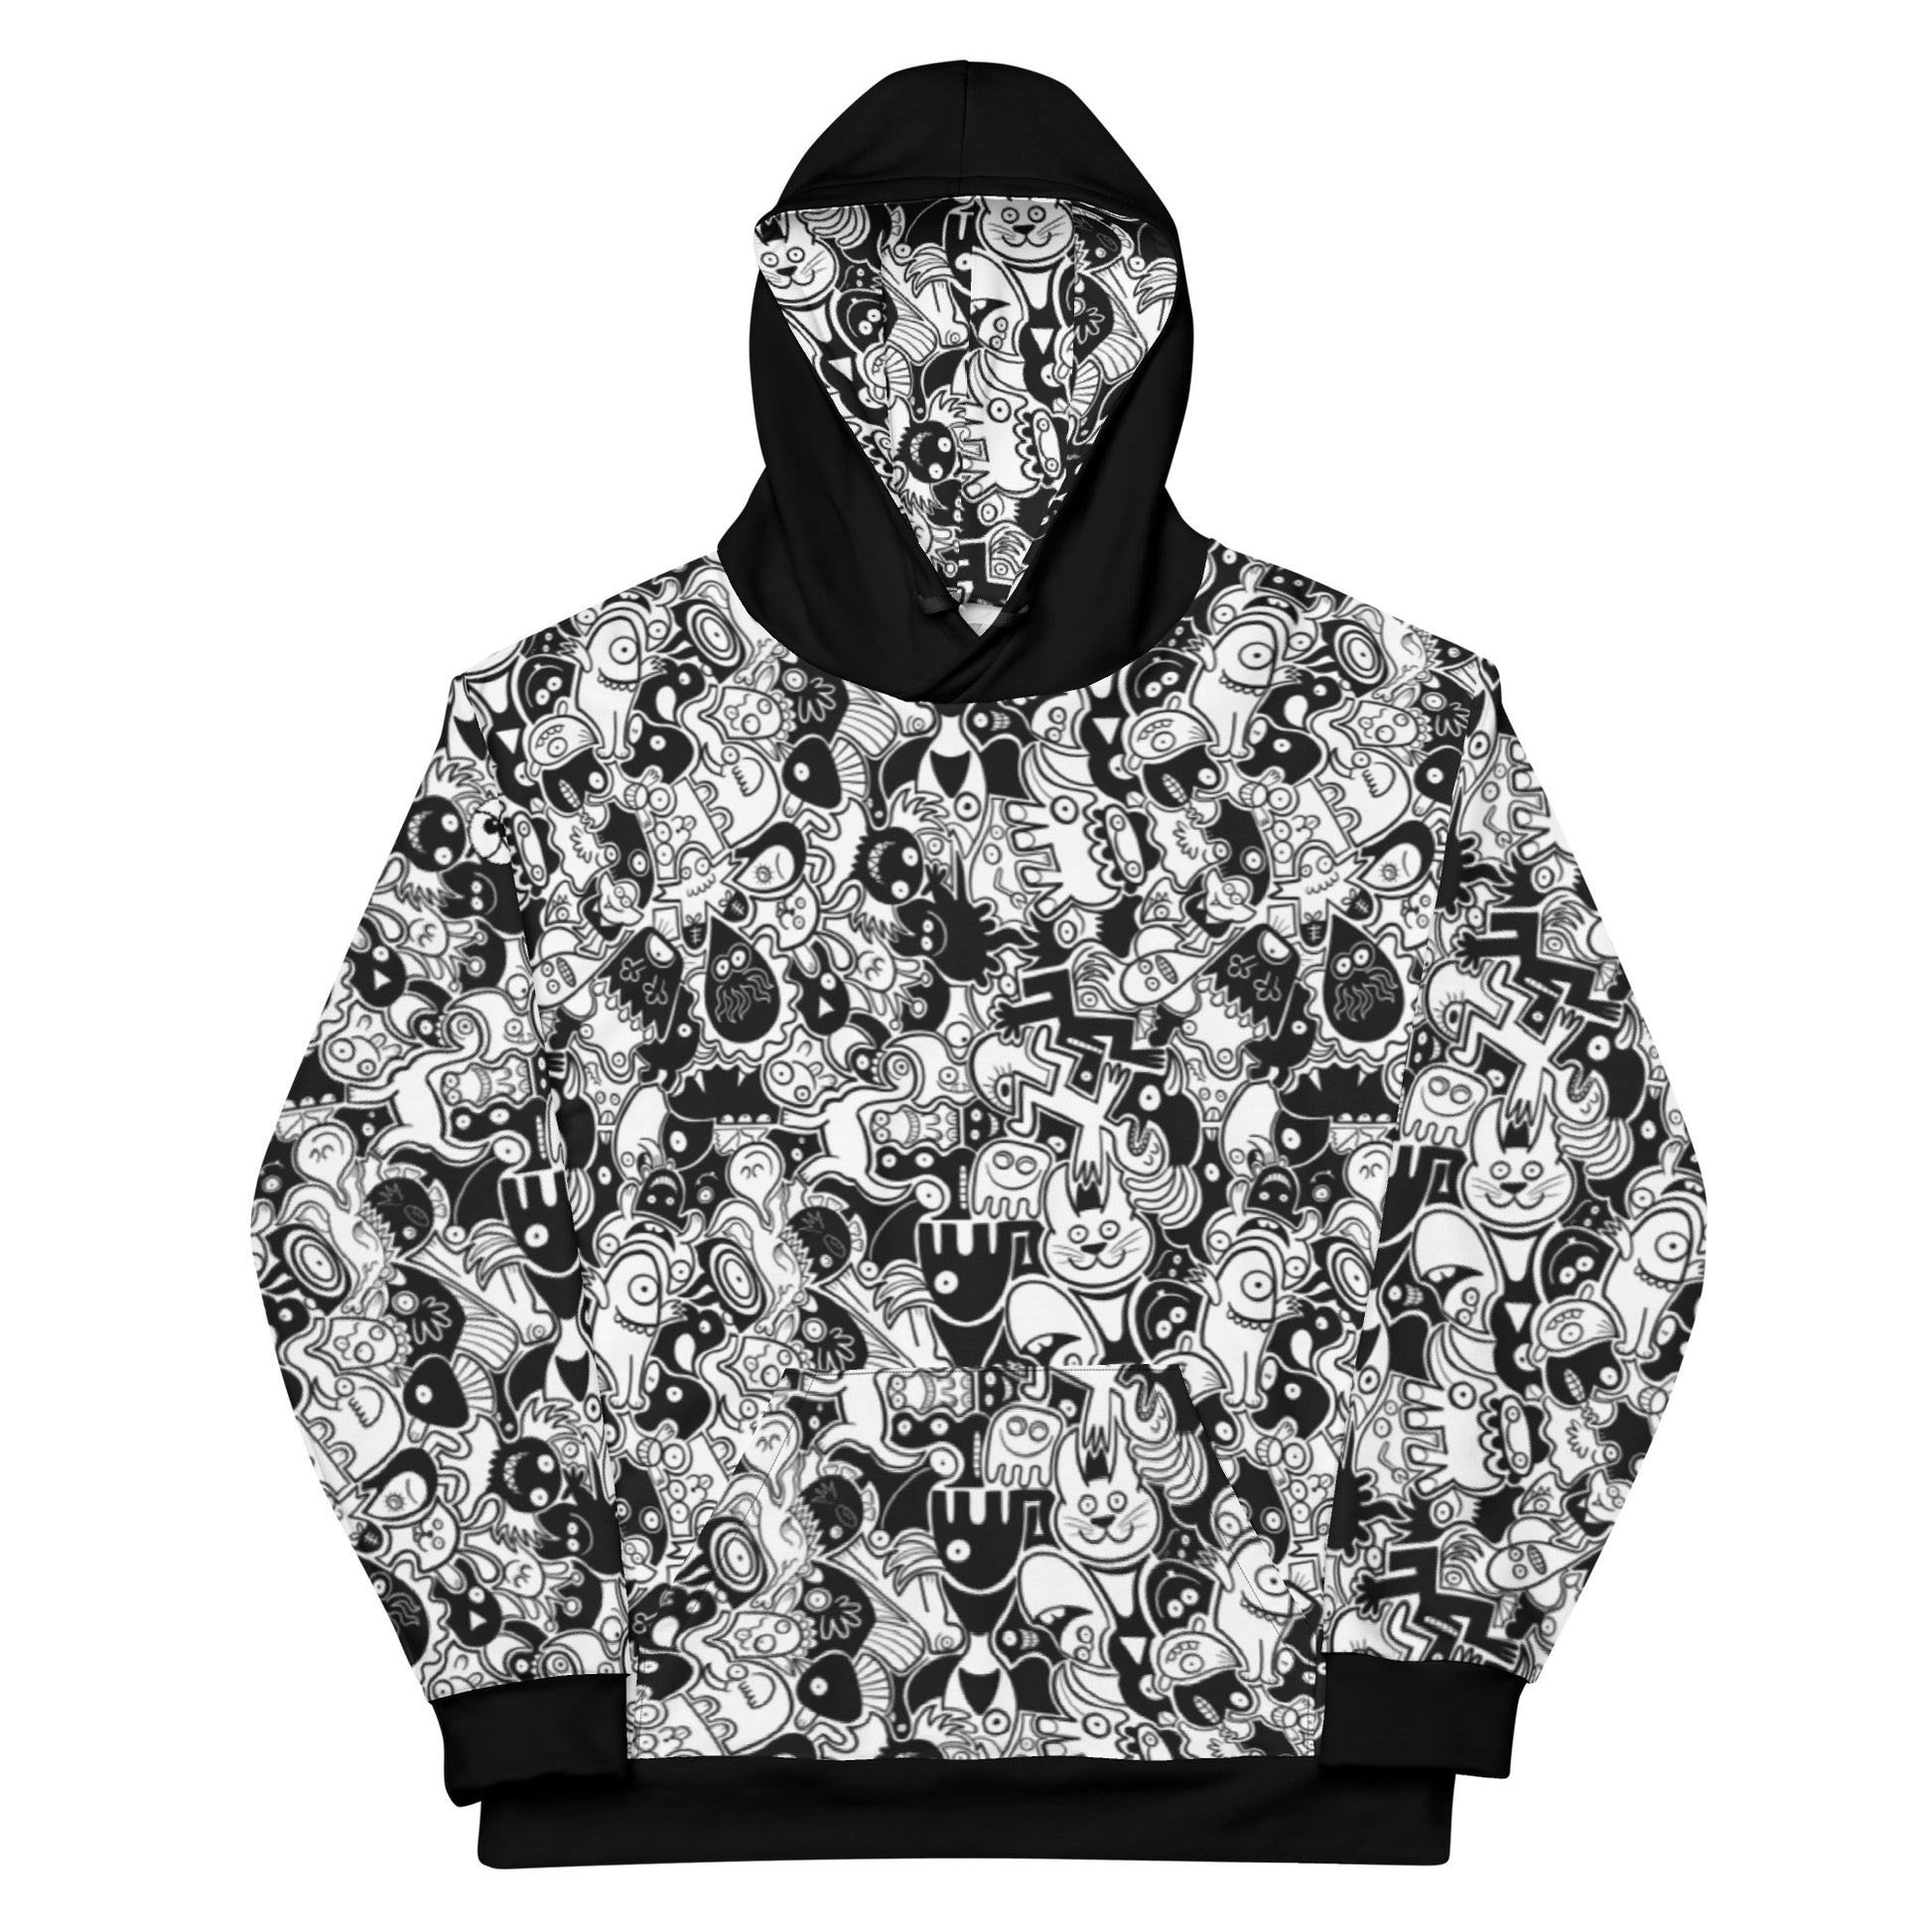 Joyful crowd of black and white doodle creatures Unisex Hoodie. Front view